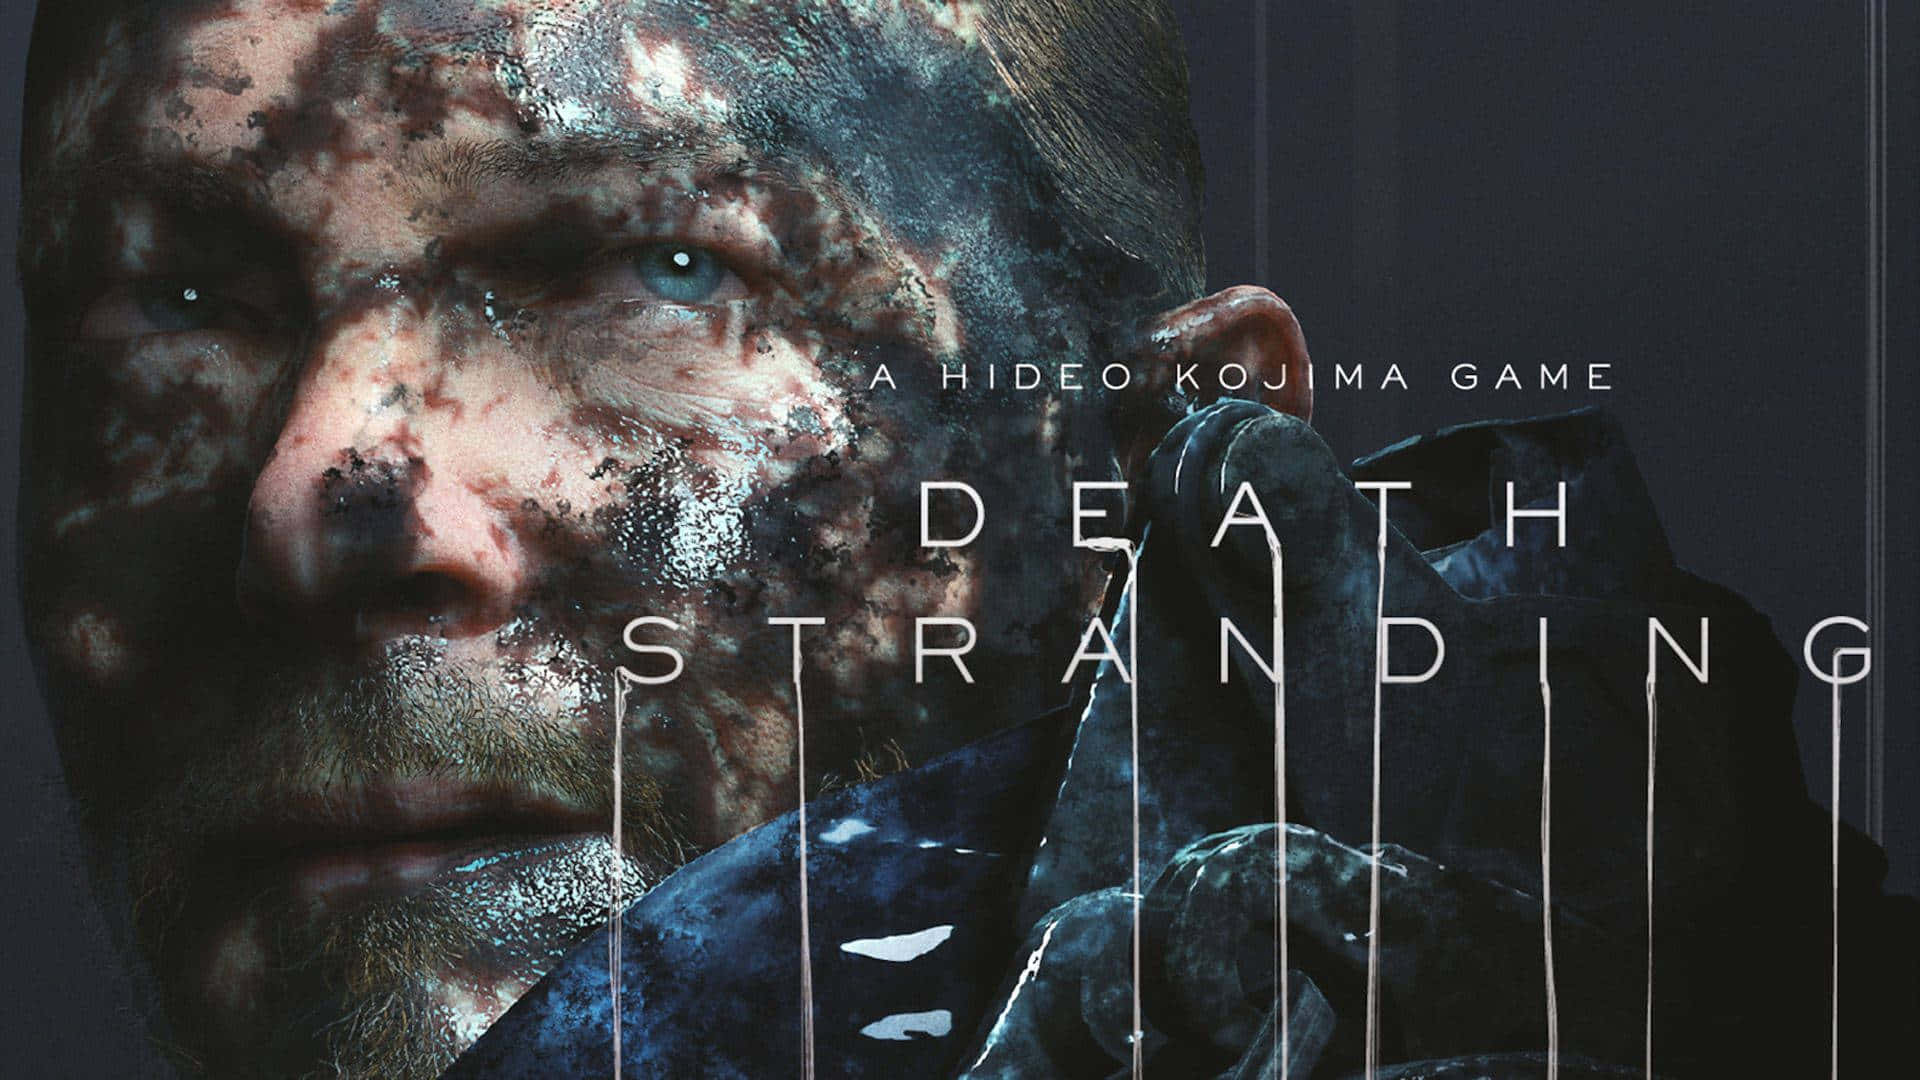 An the eerie world of Death Stranding